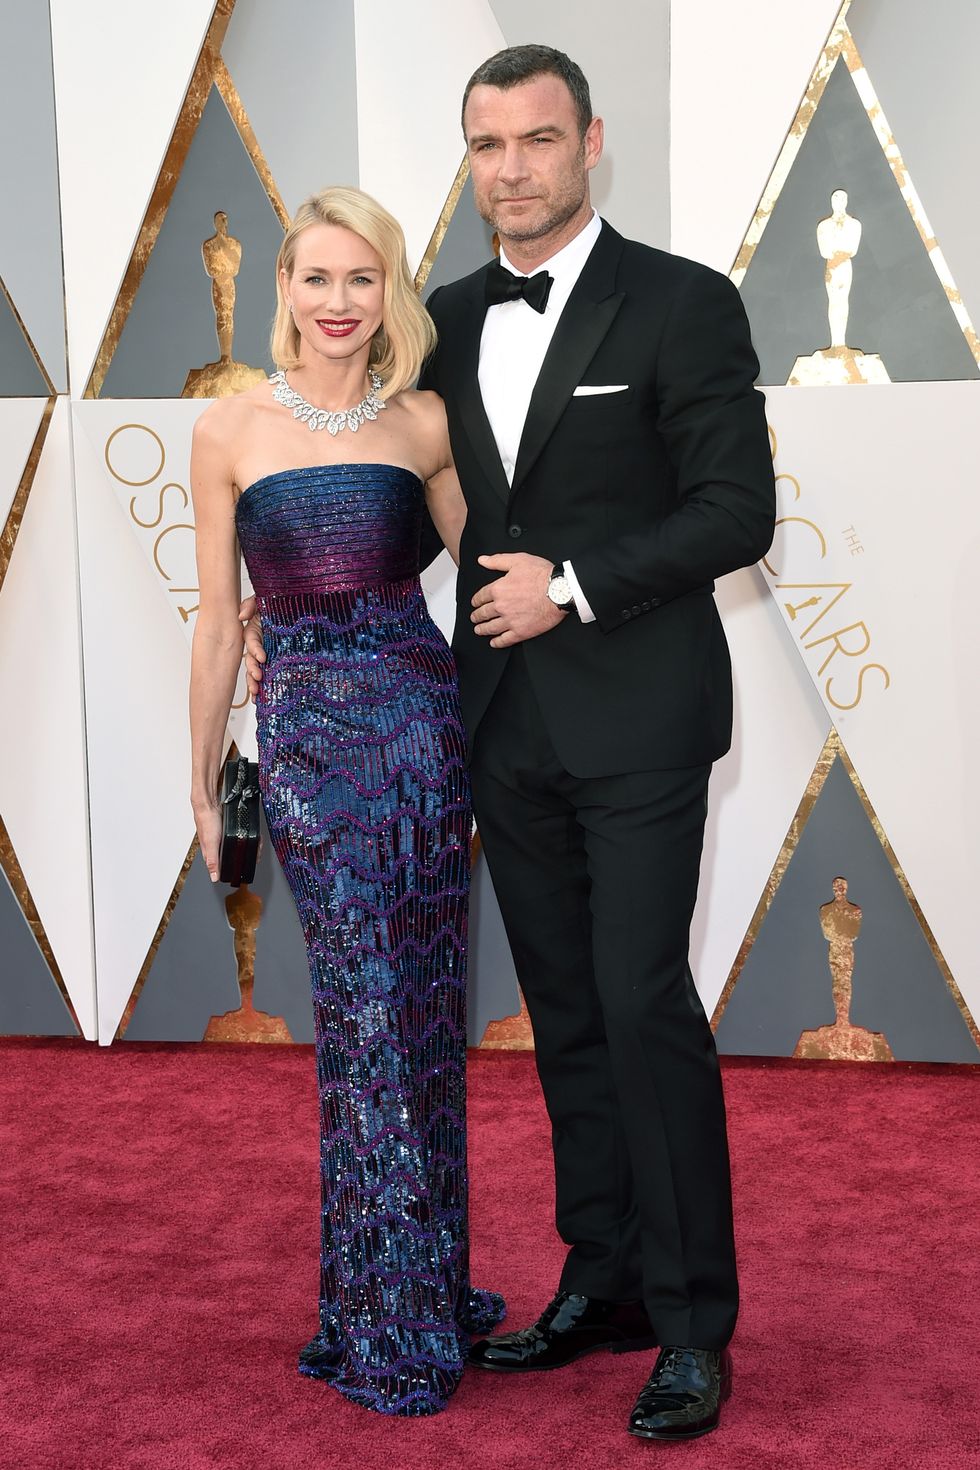 <p>After 11 years together, the Hollywood couple <a href="http://www.harpersbazaar.com/celebrity/latest/a17875/liev-schreiber-naomi-watts-separating/" target="_blank" data-tracking-id="recirc-text-link">announced</a> they decided to separate. A joint statement read, "Over the past few months we've come to the conclusion that the best way forward for us as a family is to separate as a couple. It is with great love, respect, and friendship in our hearts that we look forward to raising our children together and exploring this new phase of our relationship." Watts and Schreiber never married but share two children: <span>Alexander, 9, and Samuel, 7.</span></p>